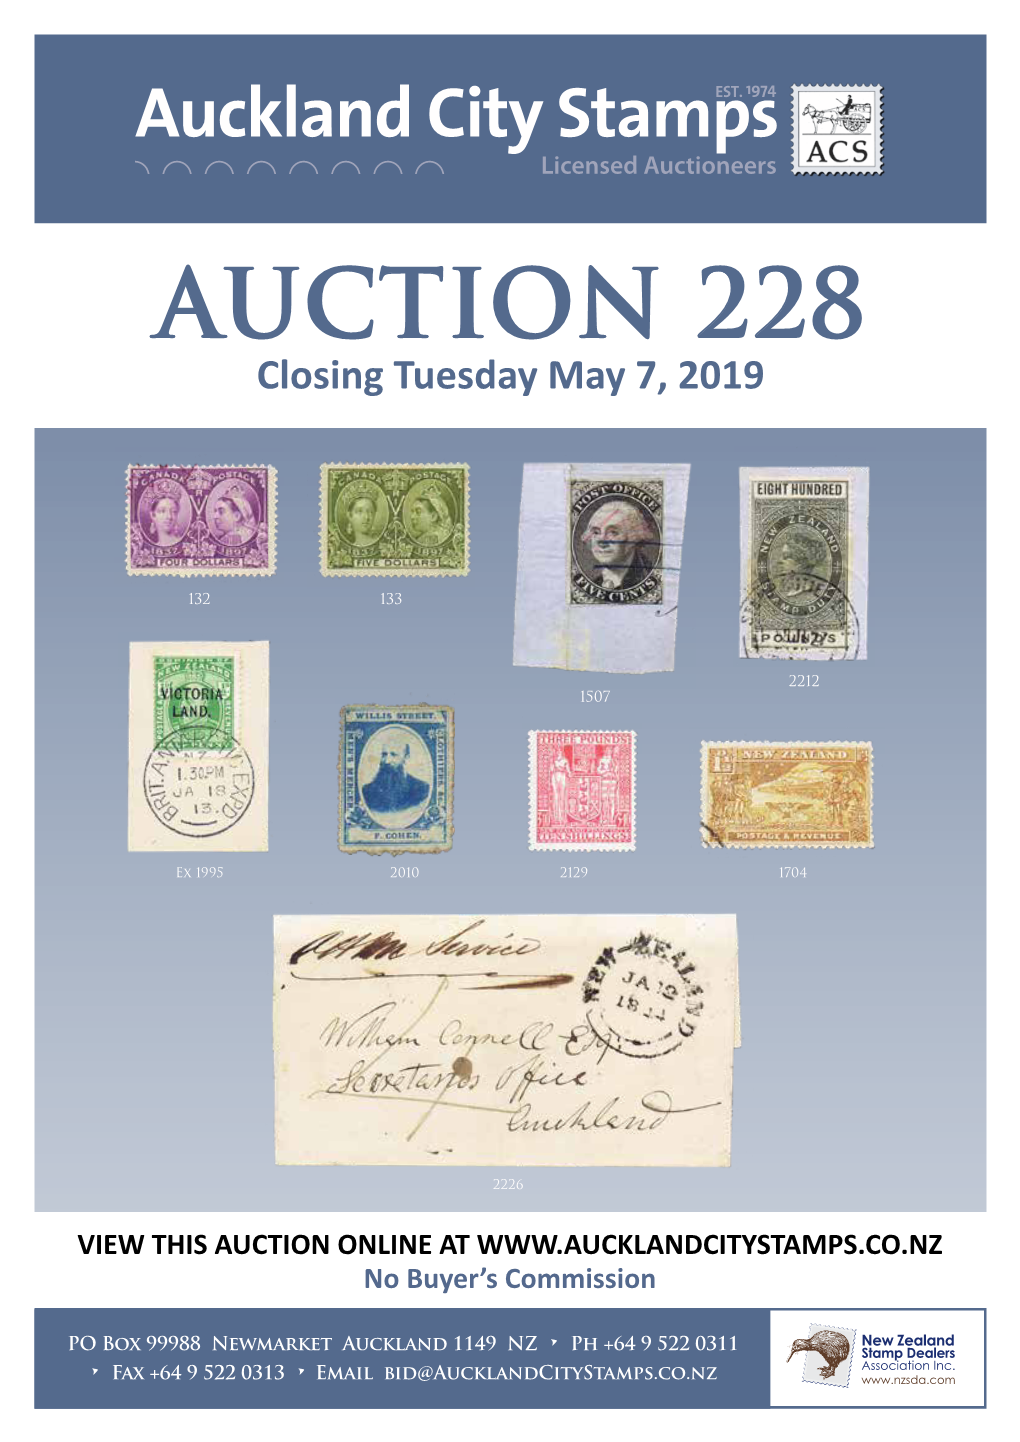 AUCTION 228 Closing Tuesday May 7, 2019